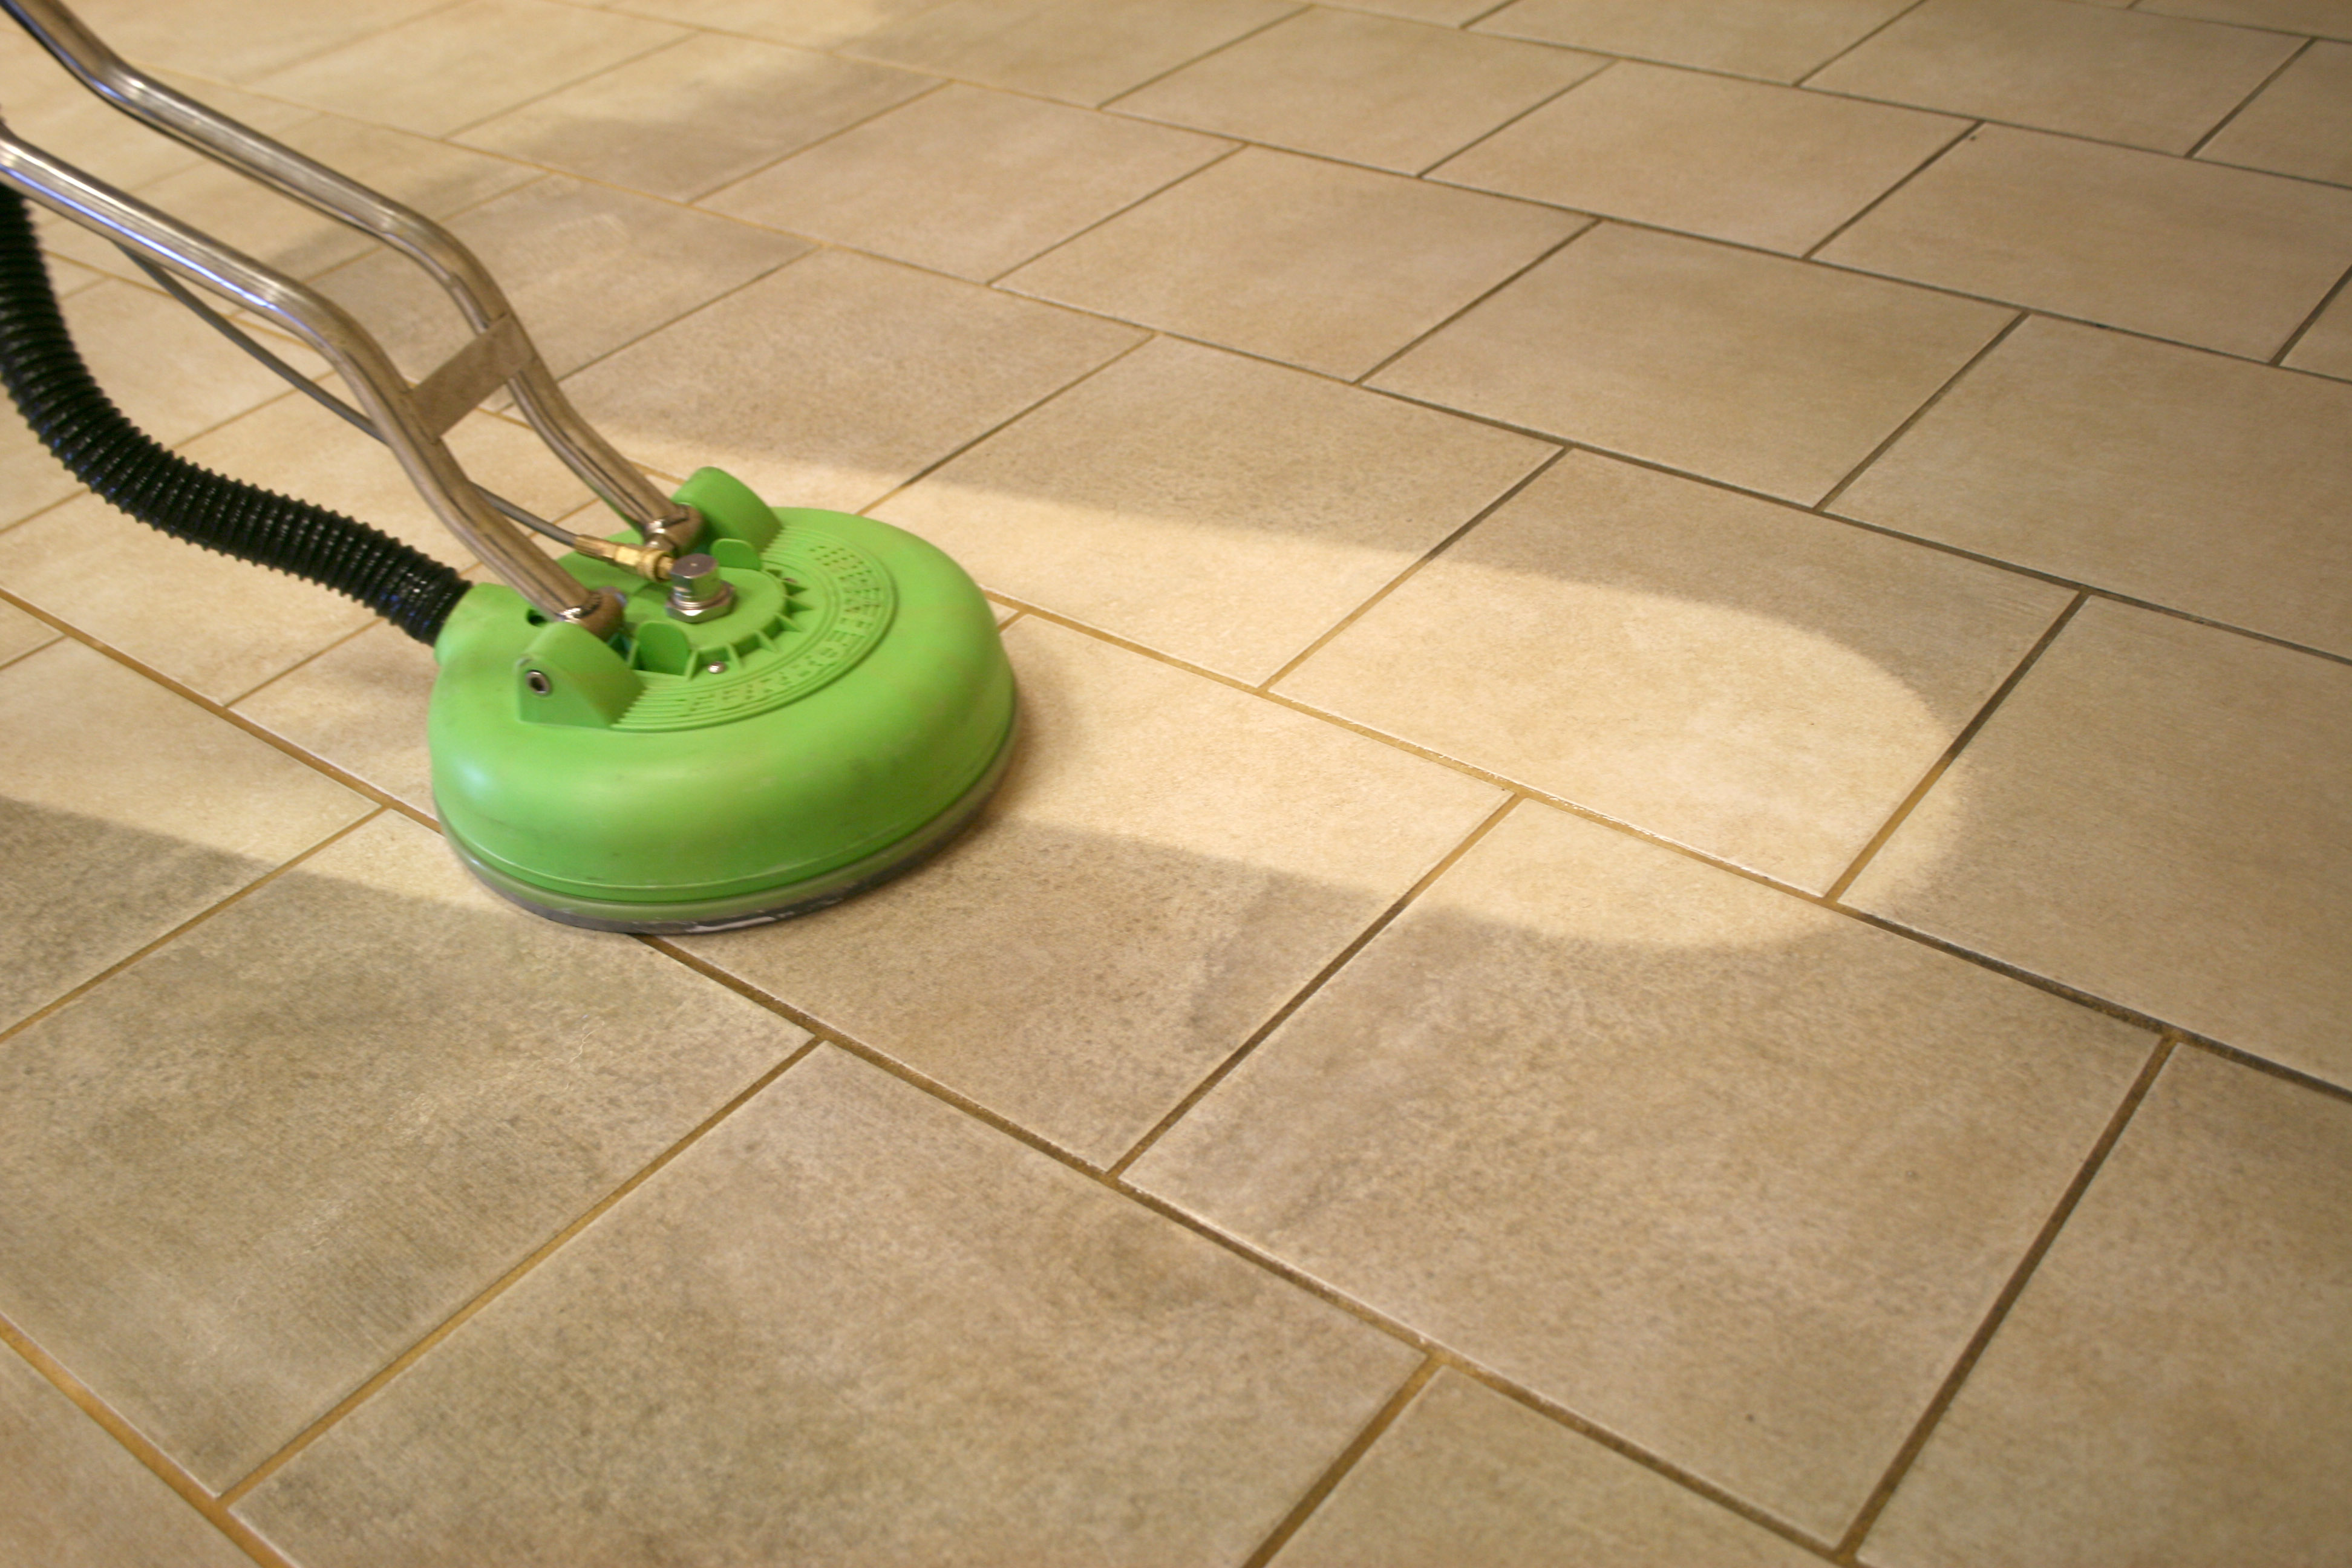 How To Clean Floor Tile Grout Uk? 